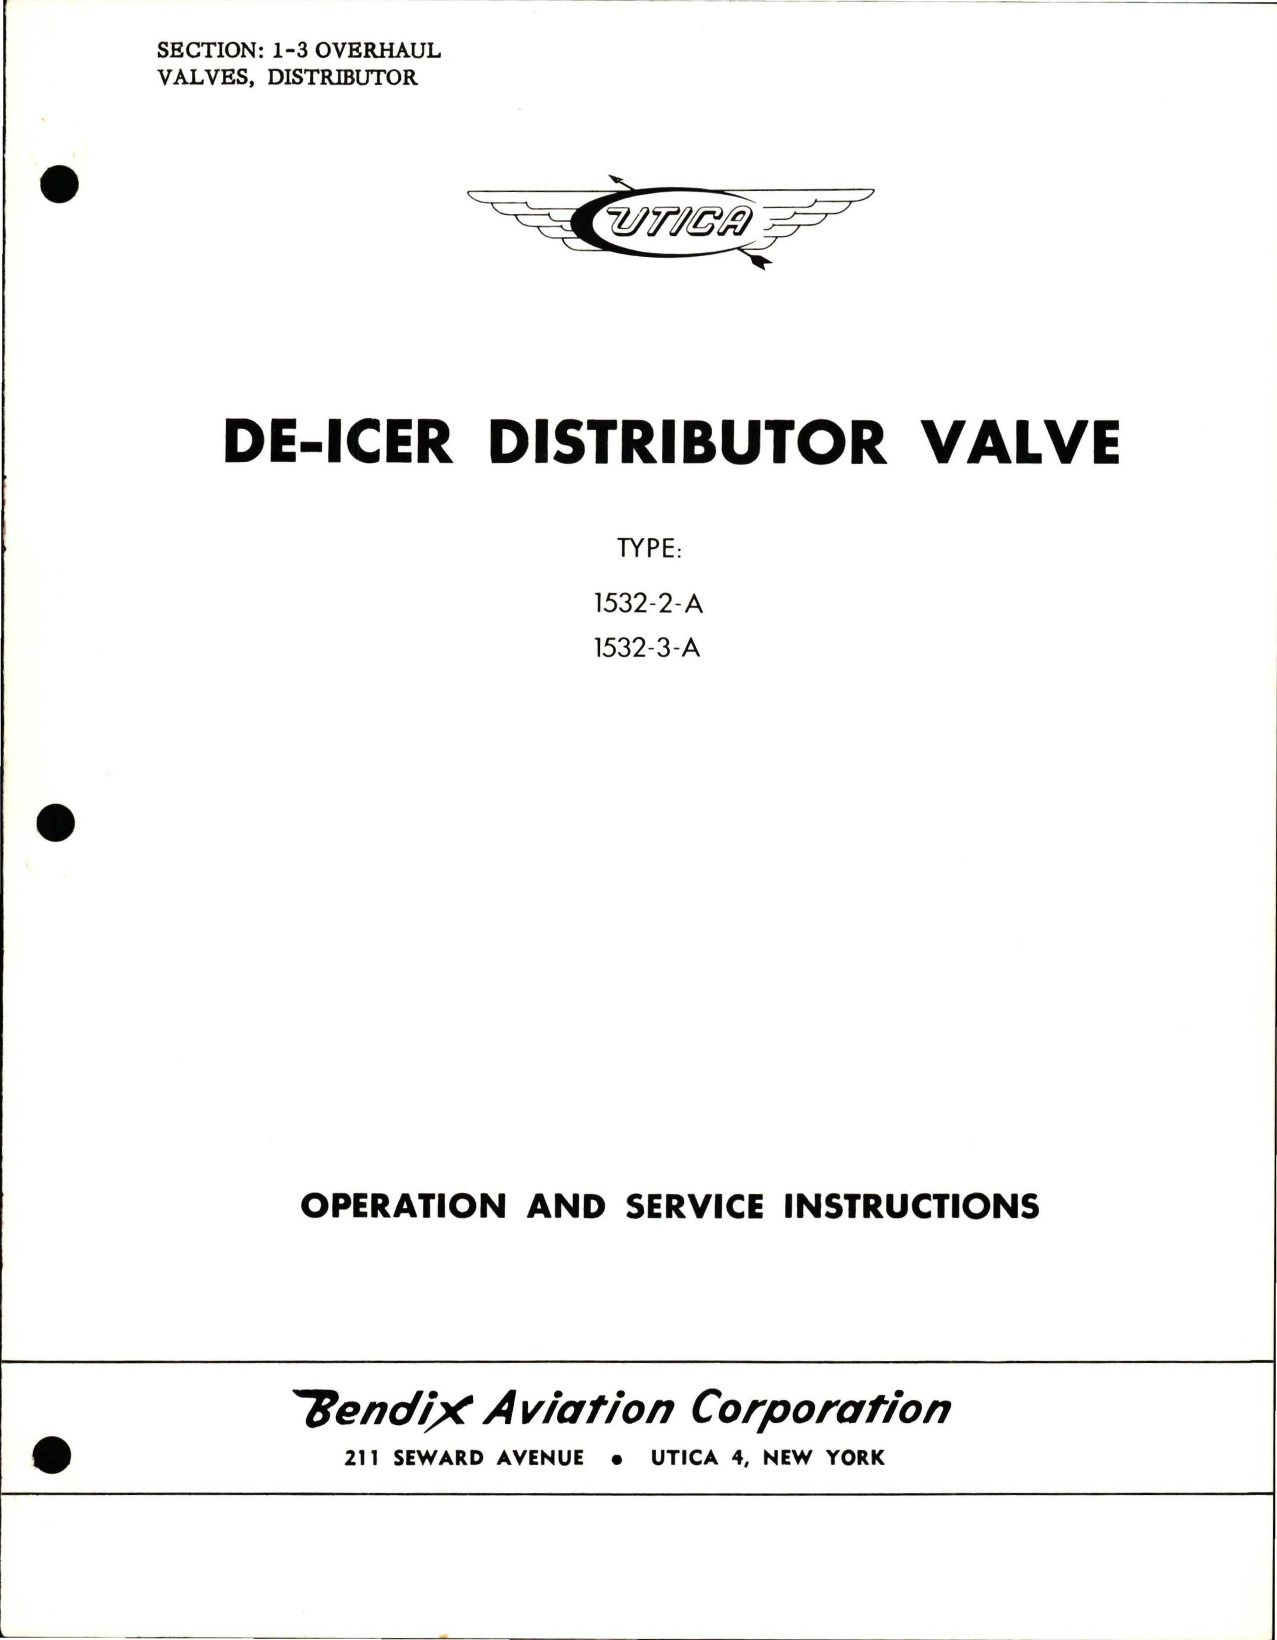 Sample page 1 from AirCorps Library document: Operation and Service Instructions for De-Icer Distributor Valve - Types 1532-2-A and 1532-3-A 